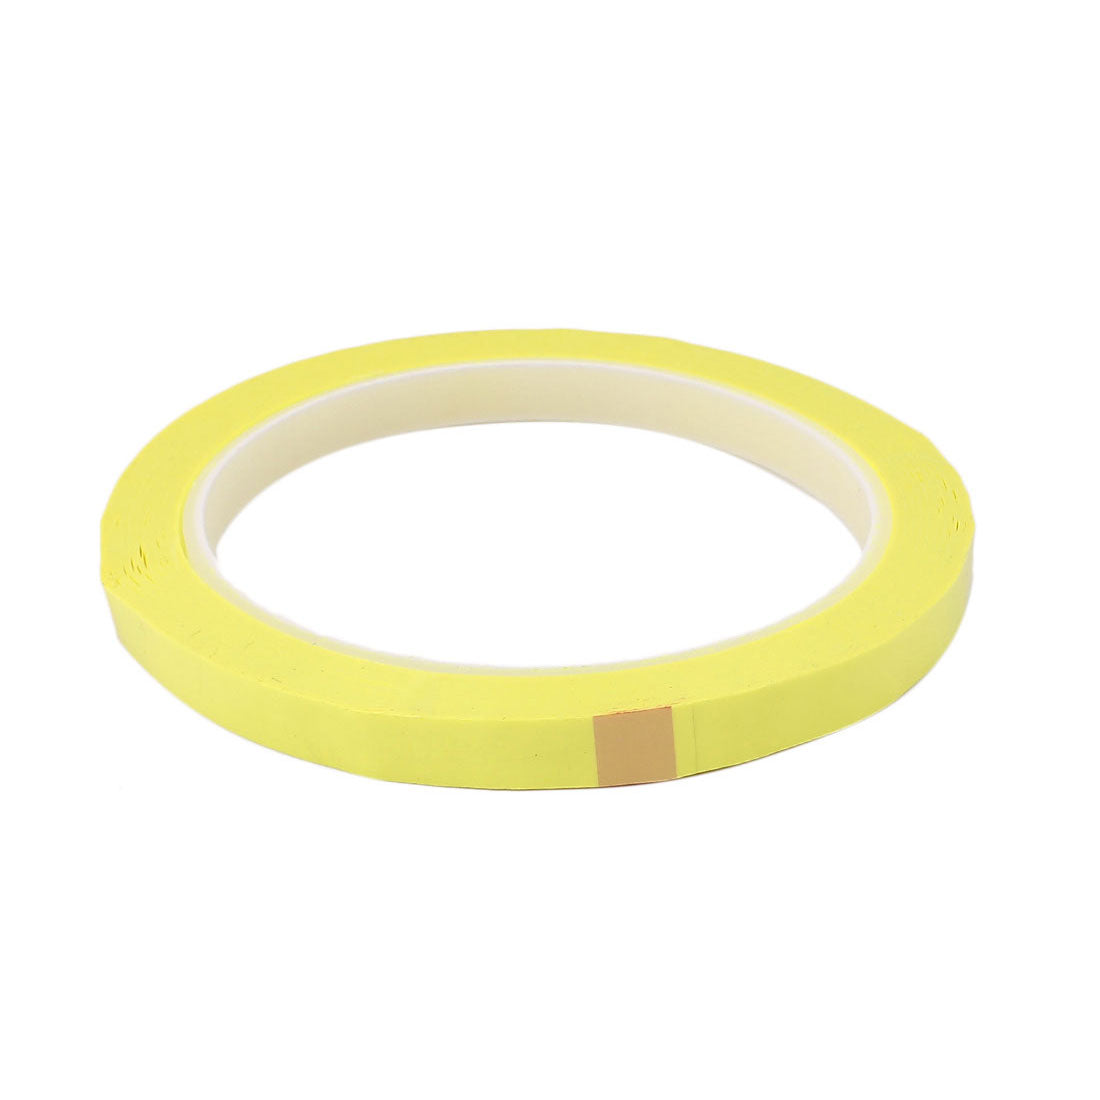 uxcell Uxcell 2 Pcs 8mm Single Sided Strong Self Adhesive Mylar Tape 50M Length Yellow